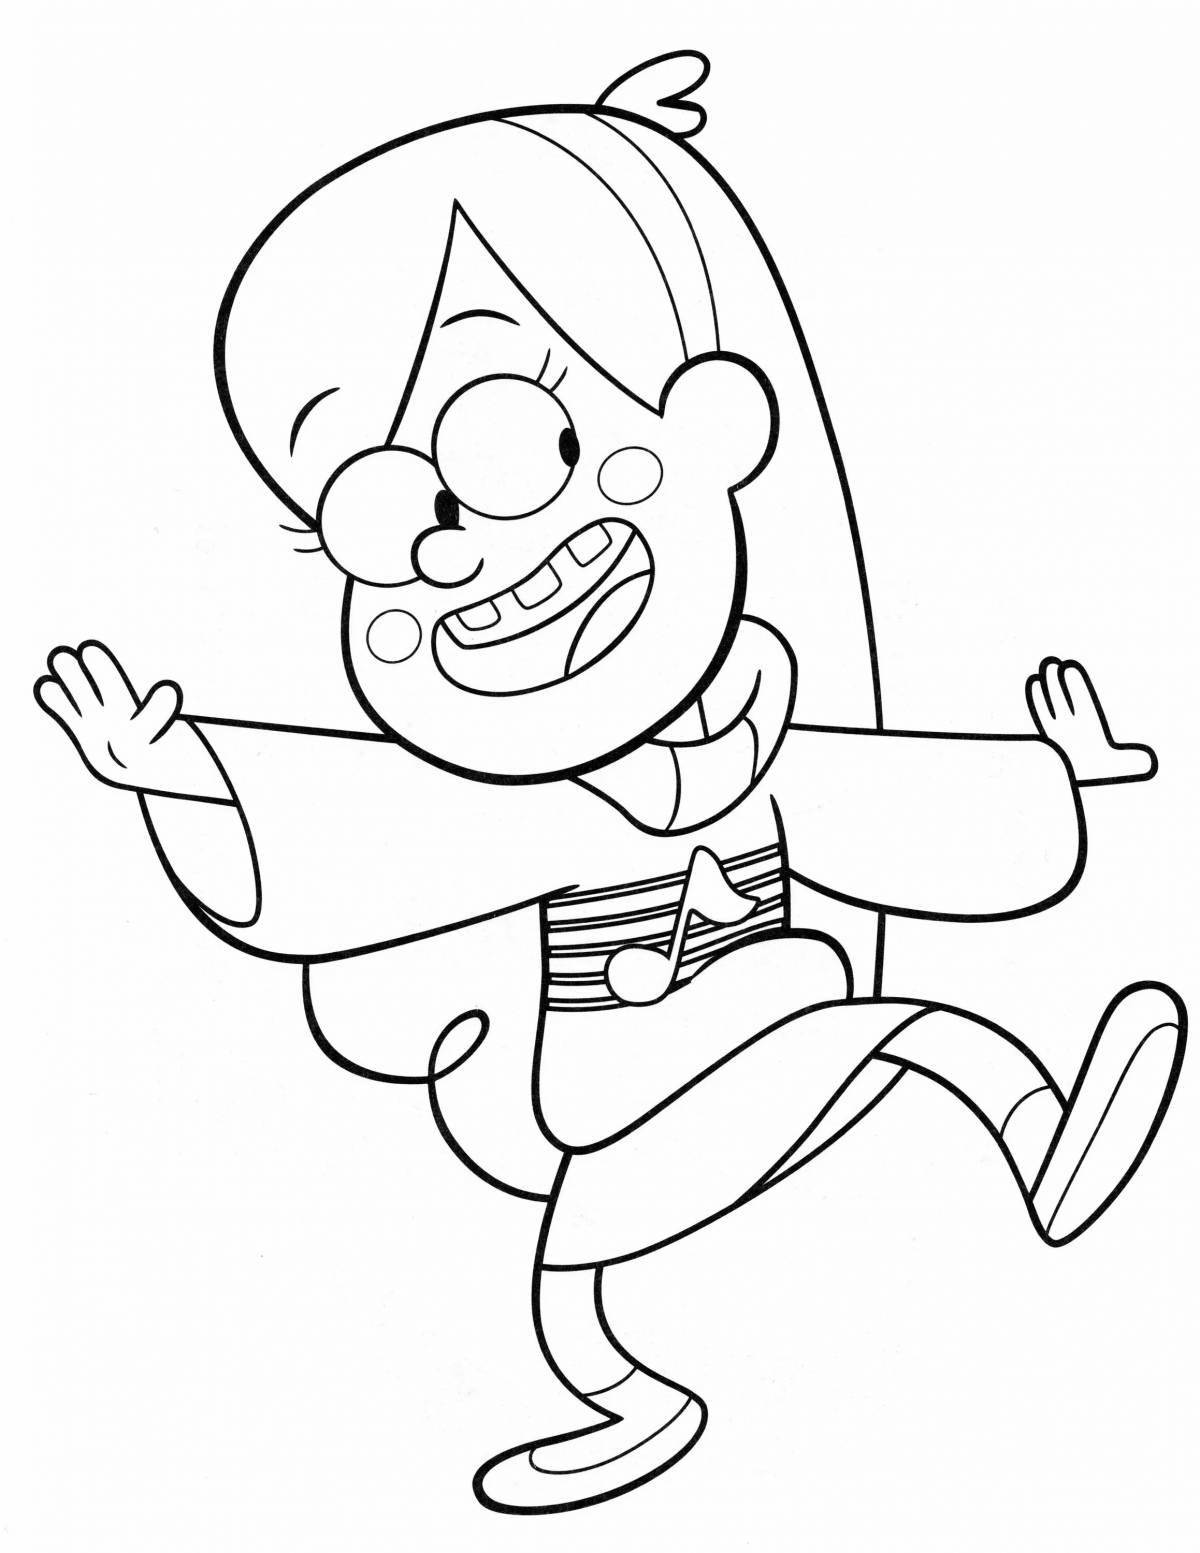 Mabel's funny coloring book